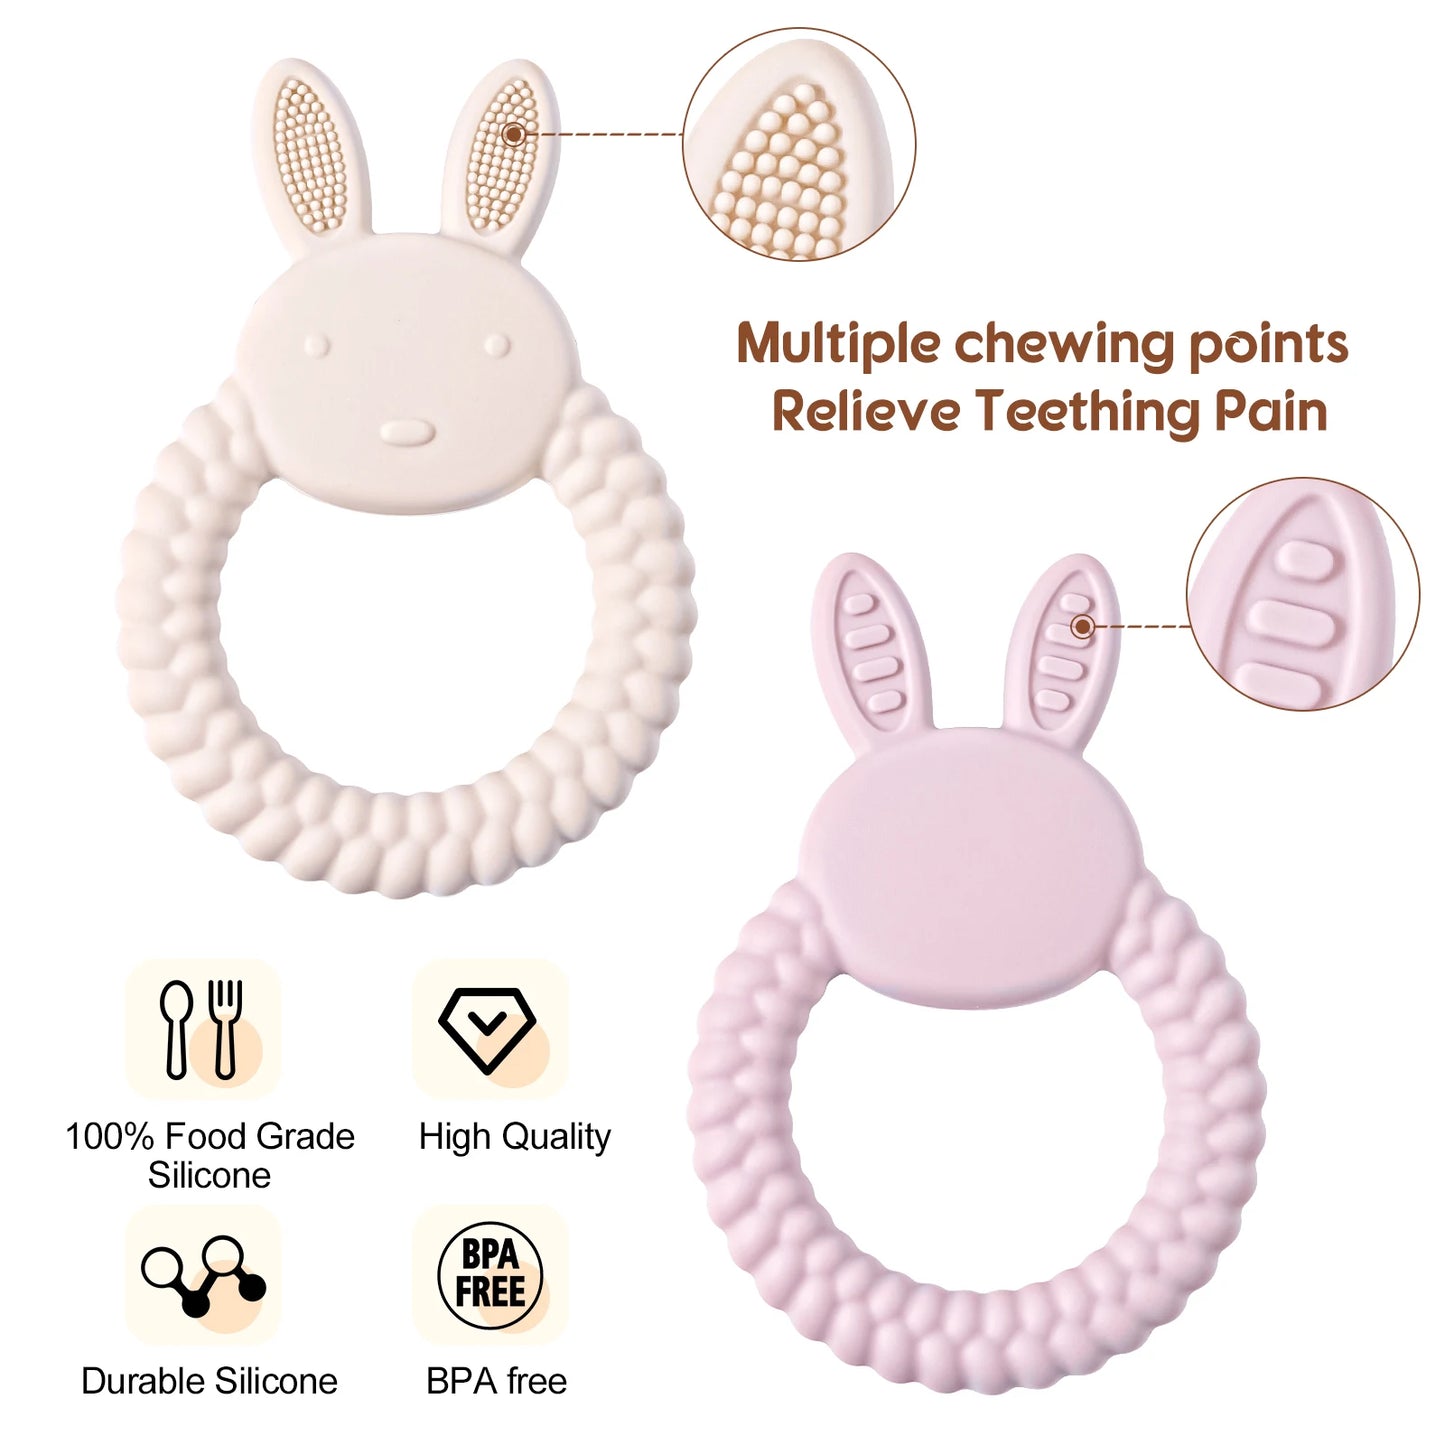 1Pcs Baby Teether Silicone Toy BPA Free Cartoon Rabbit Nursing Teething Gifts Baby Health Molar Chewing Newborn Accessories Toy